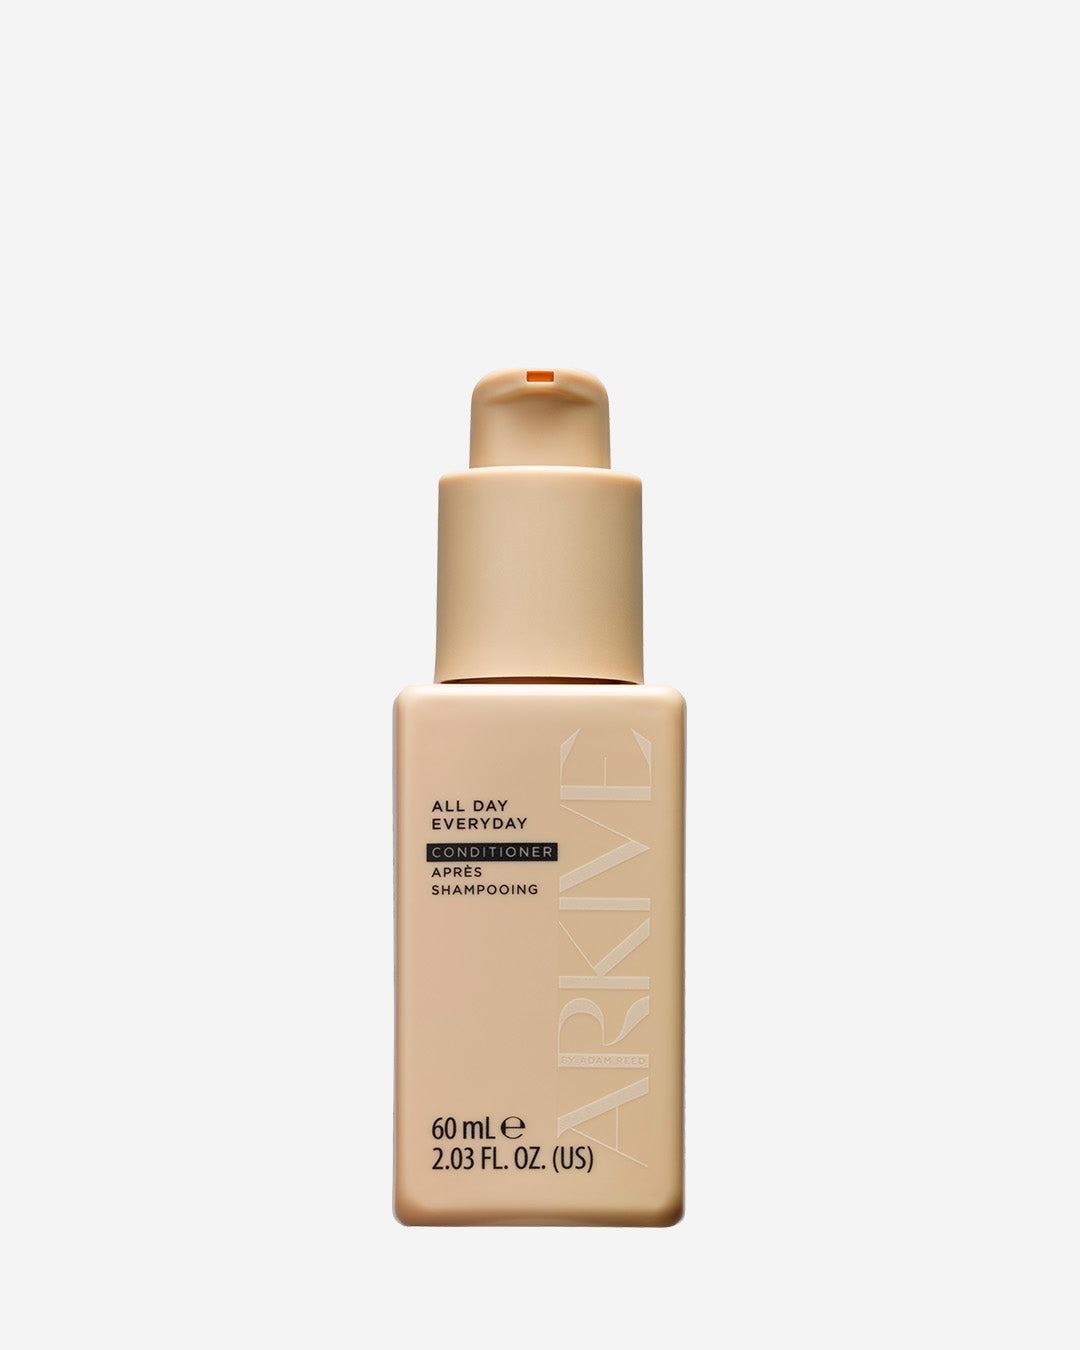 Miniature bottle of Arkive's conditioner on a white background